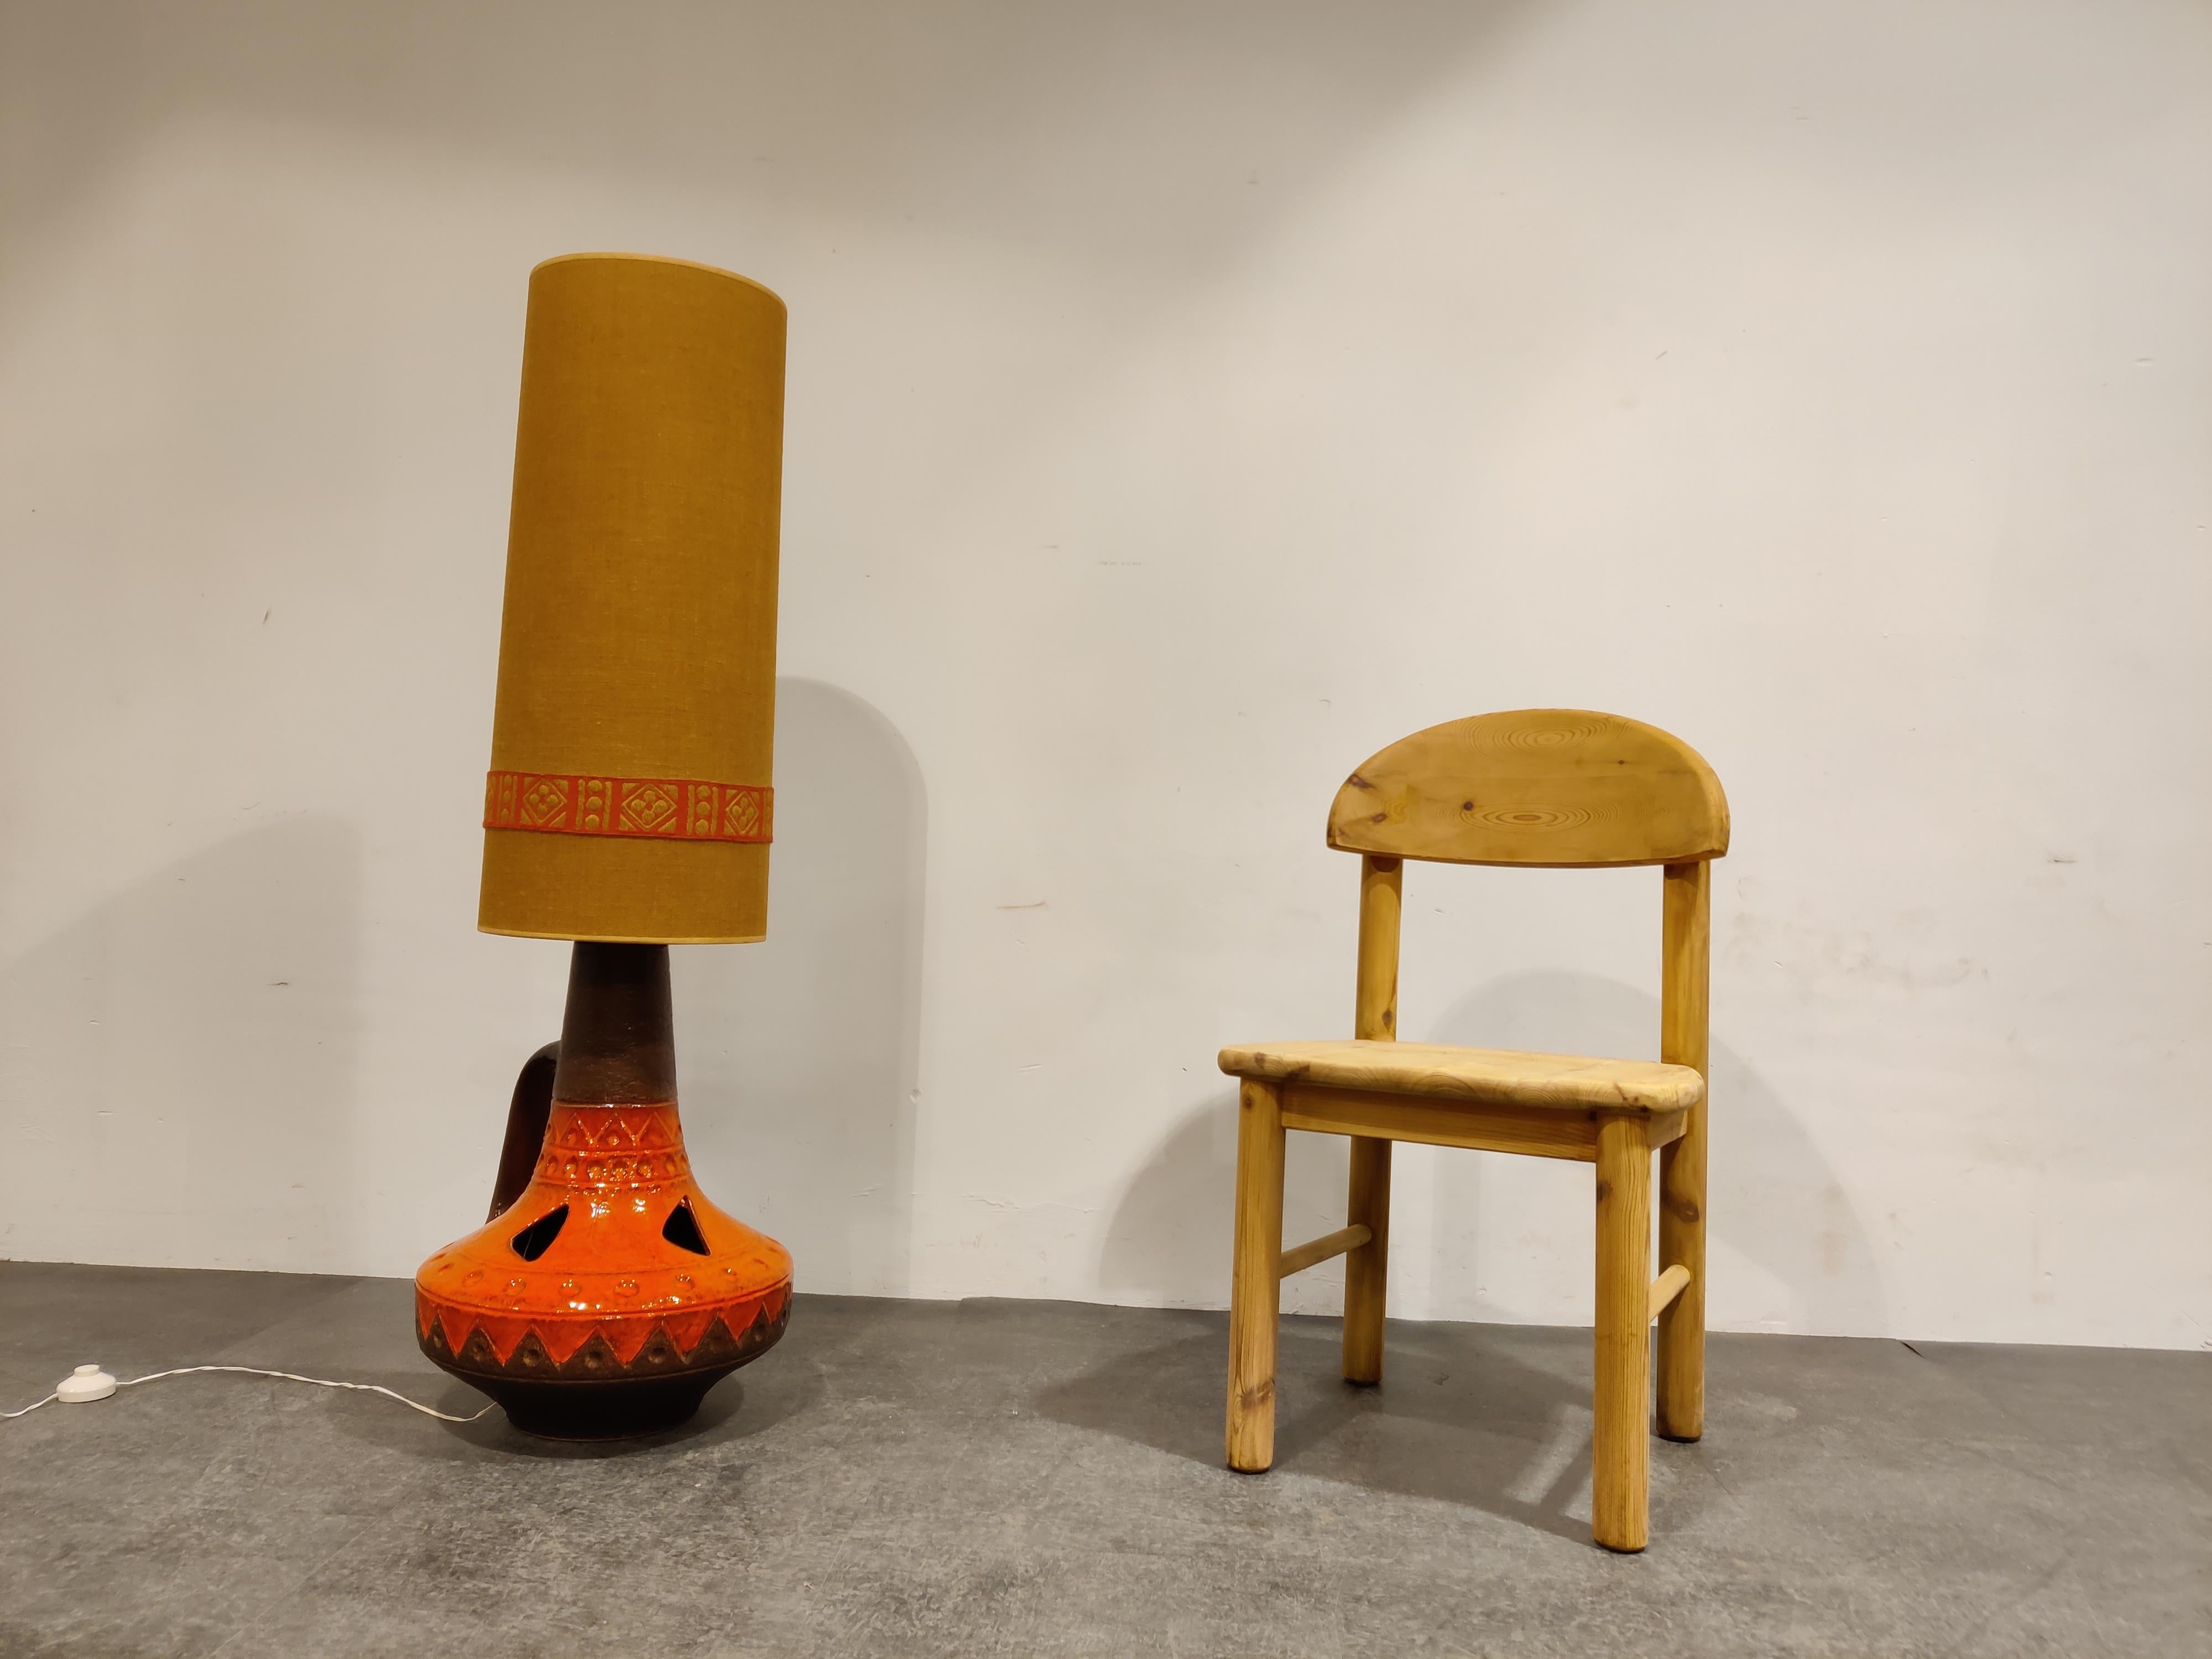 Mid century ceramic floor lamp 'Fat Lava' made in West Germany.

Comes with the original lamp shade.

The lamp emits an ambient soft light.

Tested and ready for use with a regular E26/E27 light bulb.

Good condition

1960s -